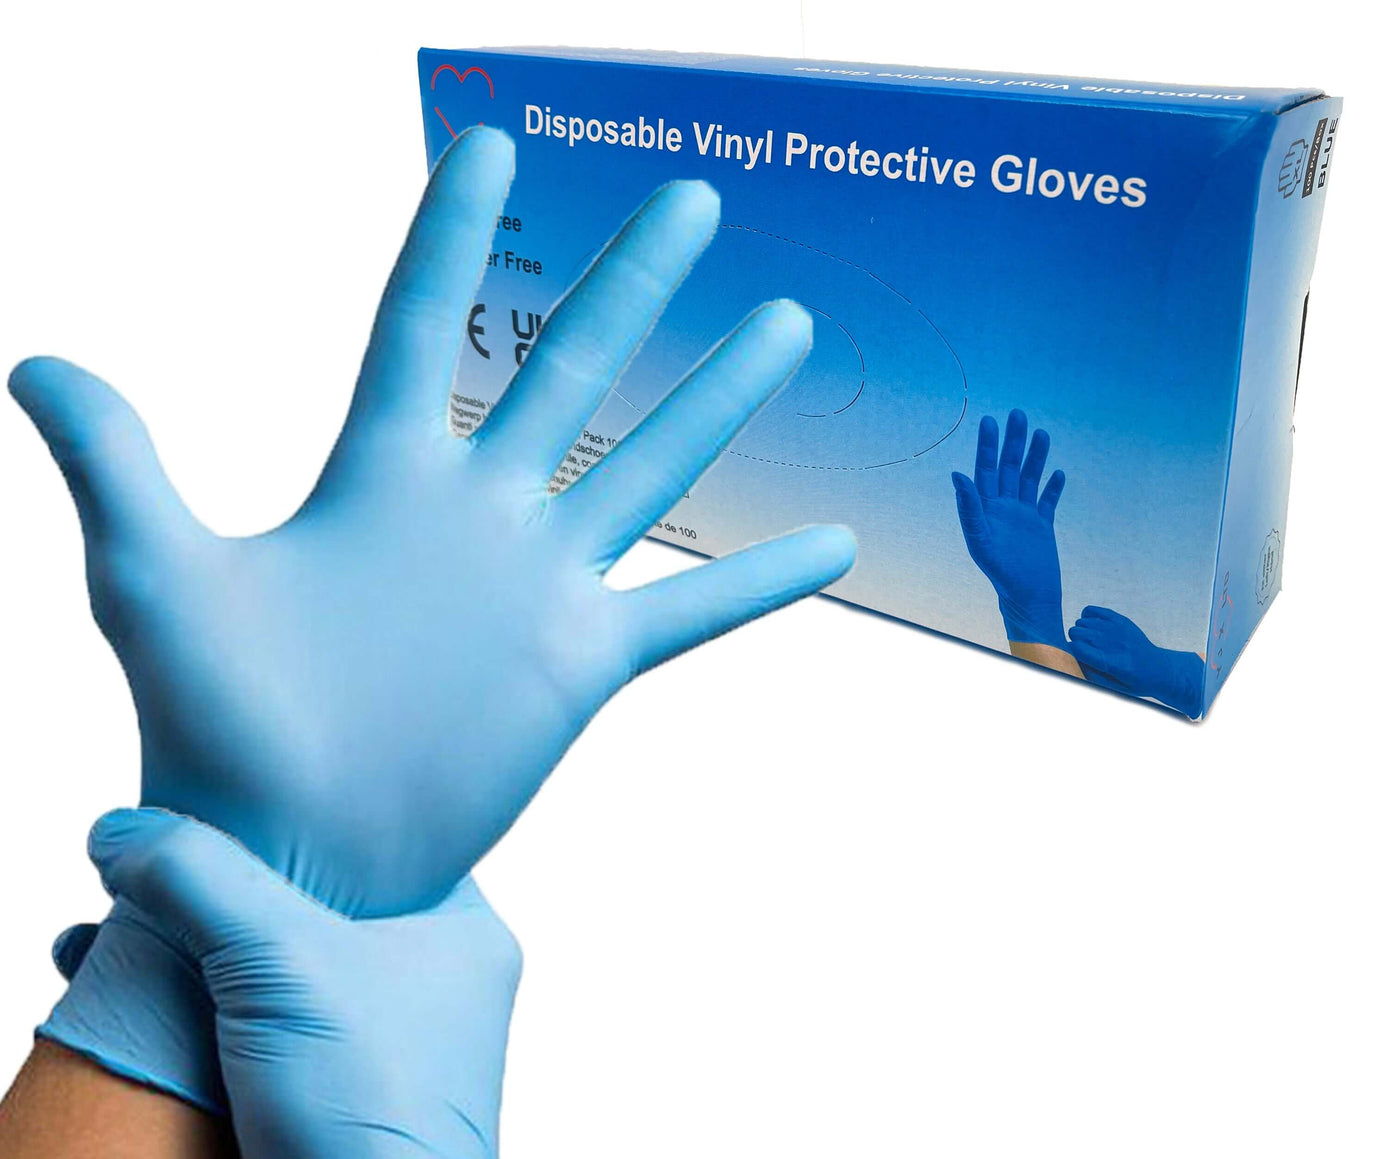 Blue Vinyl Gloves, Pack of 100, CE & EU Certified, Powder & Latex Free, Two-Handed, Multi-Purpose Disposable Gloves, Extra Strong, For home, kitchen, catering, restaurant. (6838757163107)